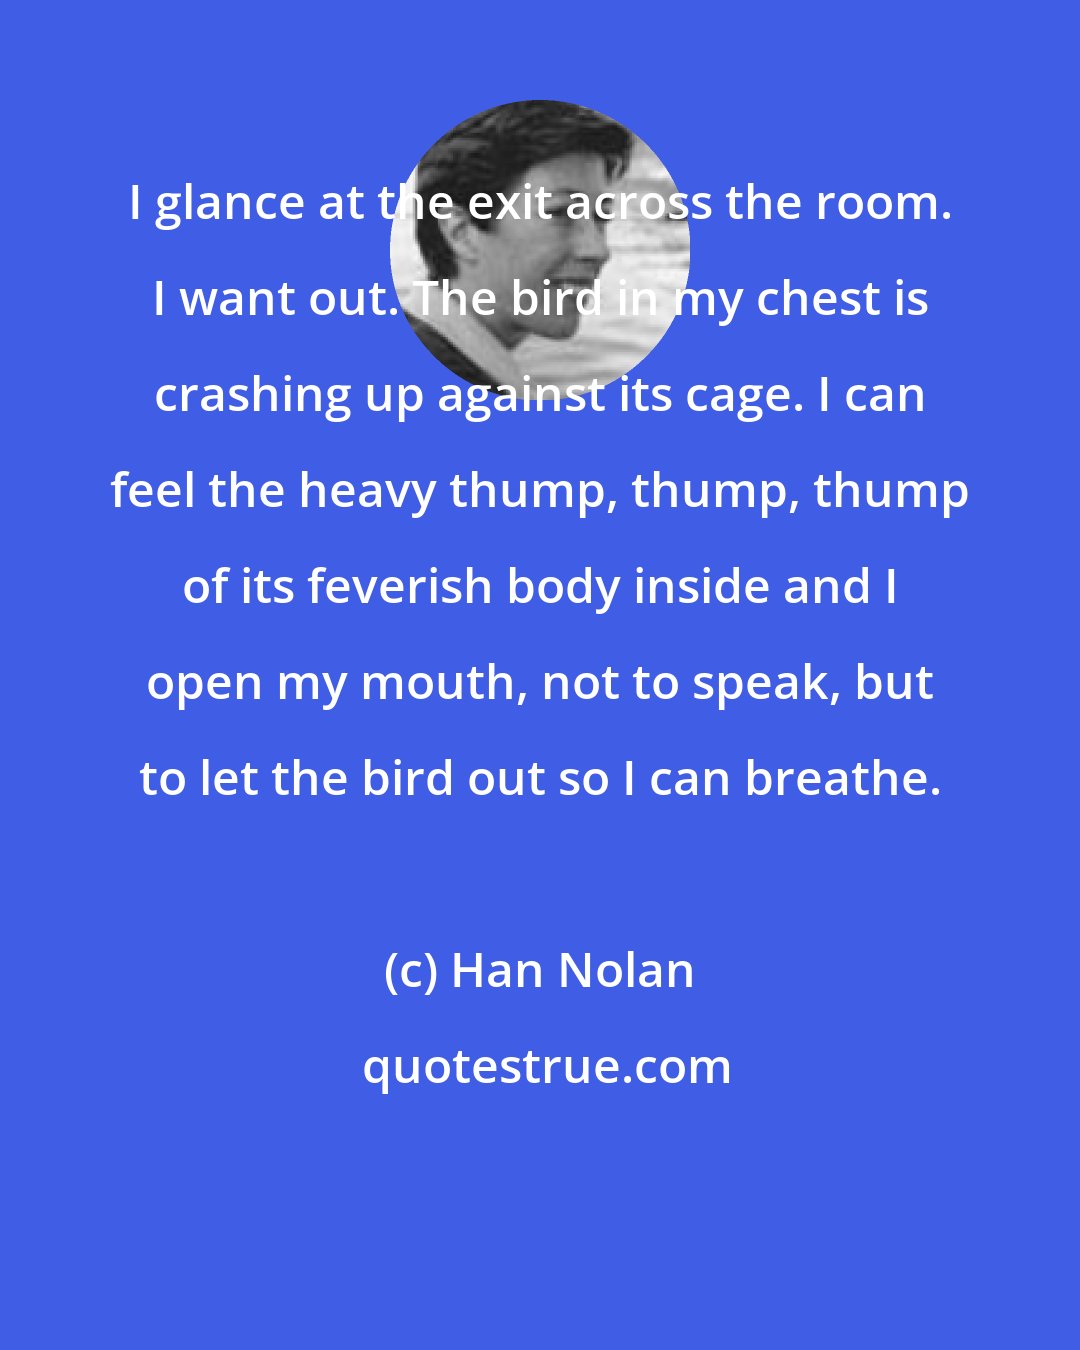 Han Nolan: I glance at the exit across the room. I want out. The bird in my chest is crashing up against its cage. I can feel the heavy thump, thump, thump of its feverish body inside and I open my mouth, not to speak, but to let the bird out so I can breathe.